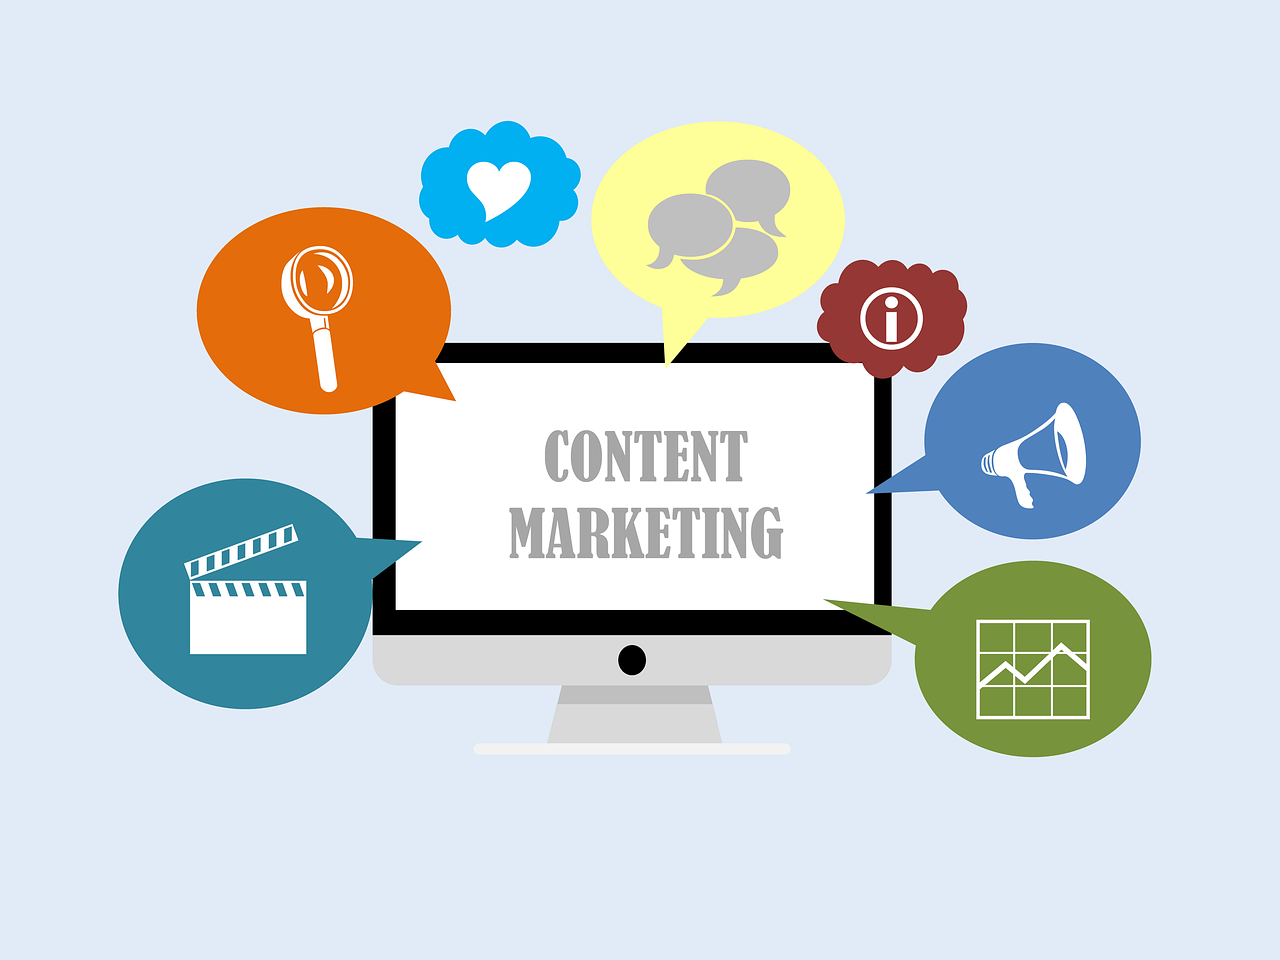  How Content Marketing Can Help Your Business